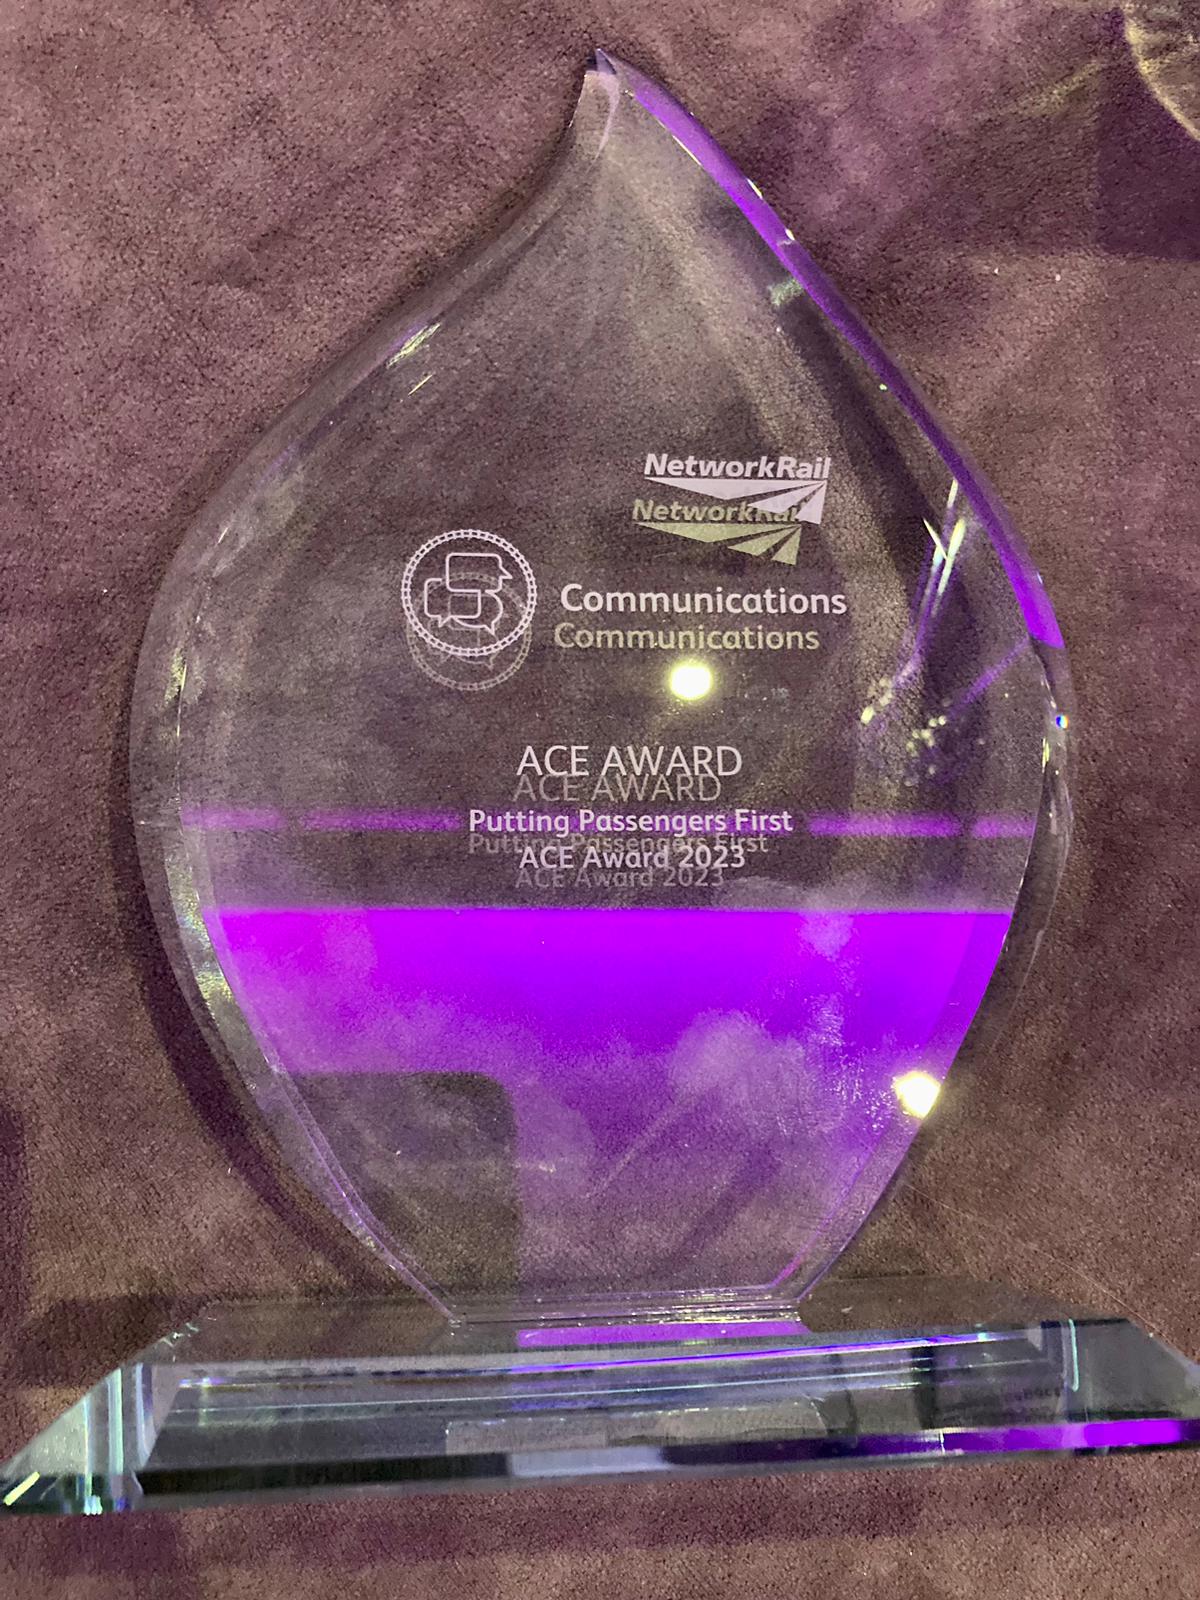 Image shows the ACE award. A clear, glass, award in the shape of a teardrop. The award has the network Rail logo at the top, and text which says: "Communications, ACE Award. Putting Passengers First. ACE Award 2023.'